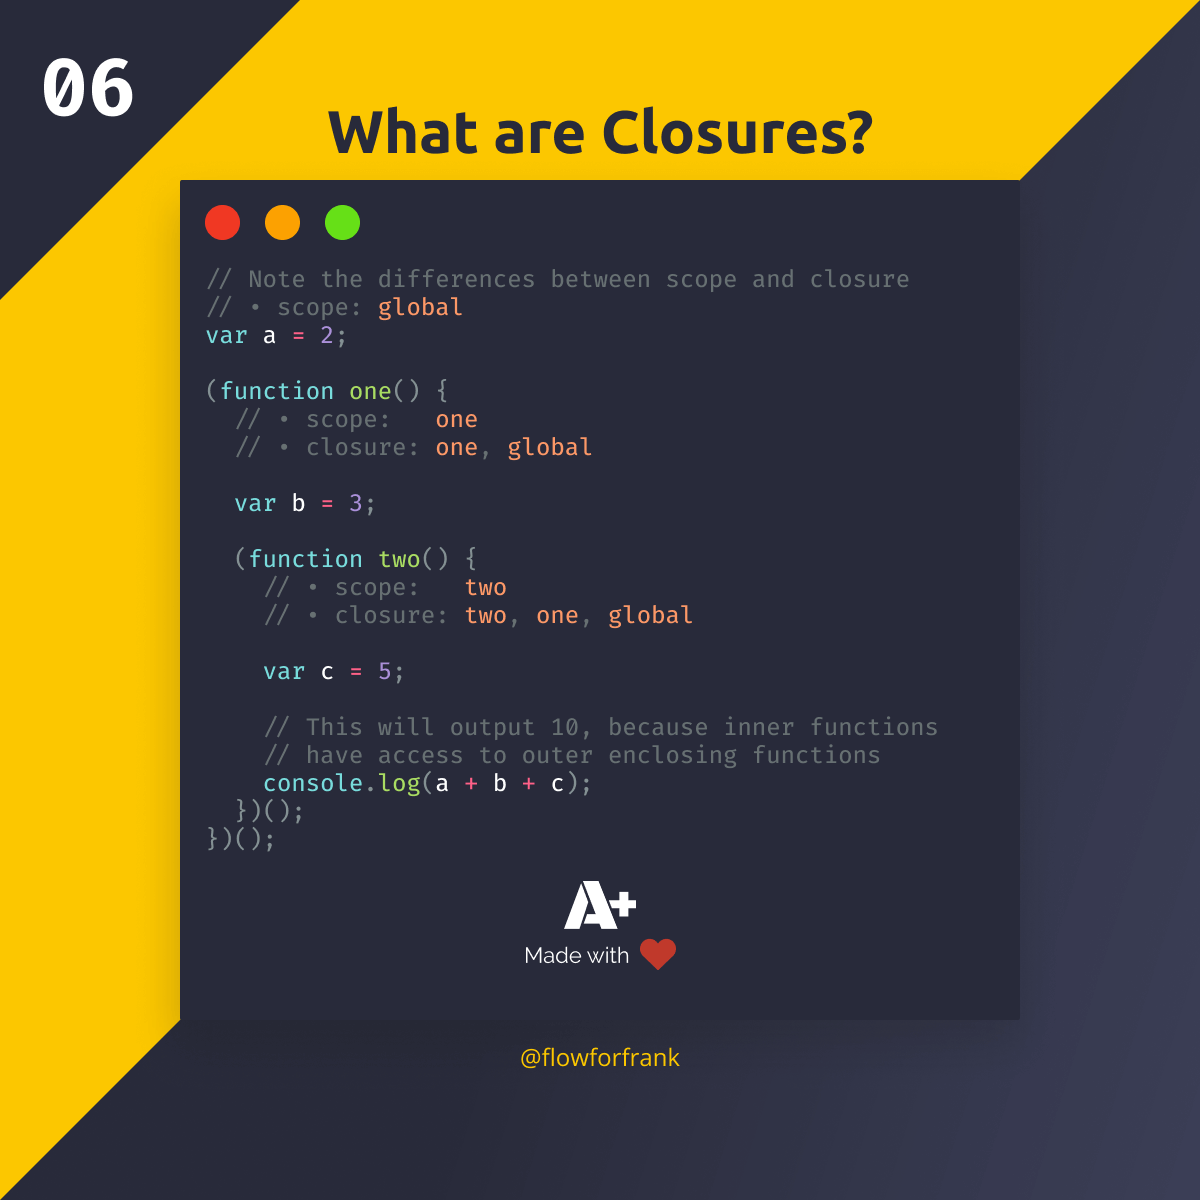 What are Closures in JavaScript?